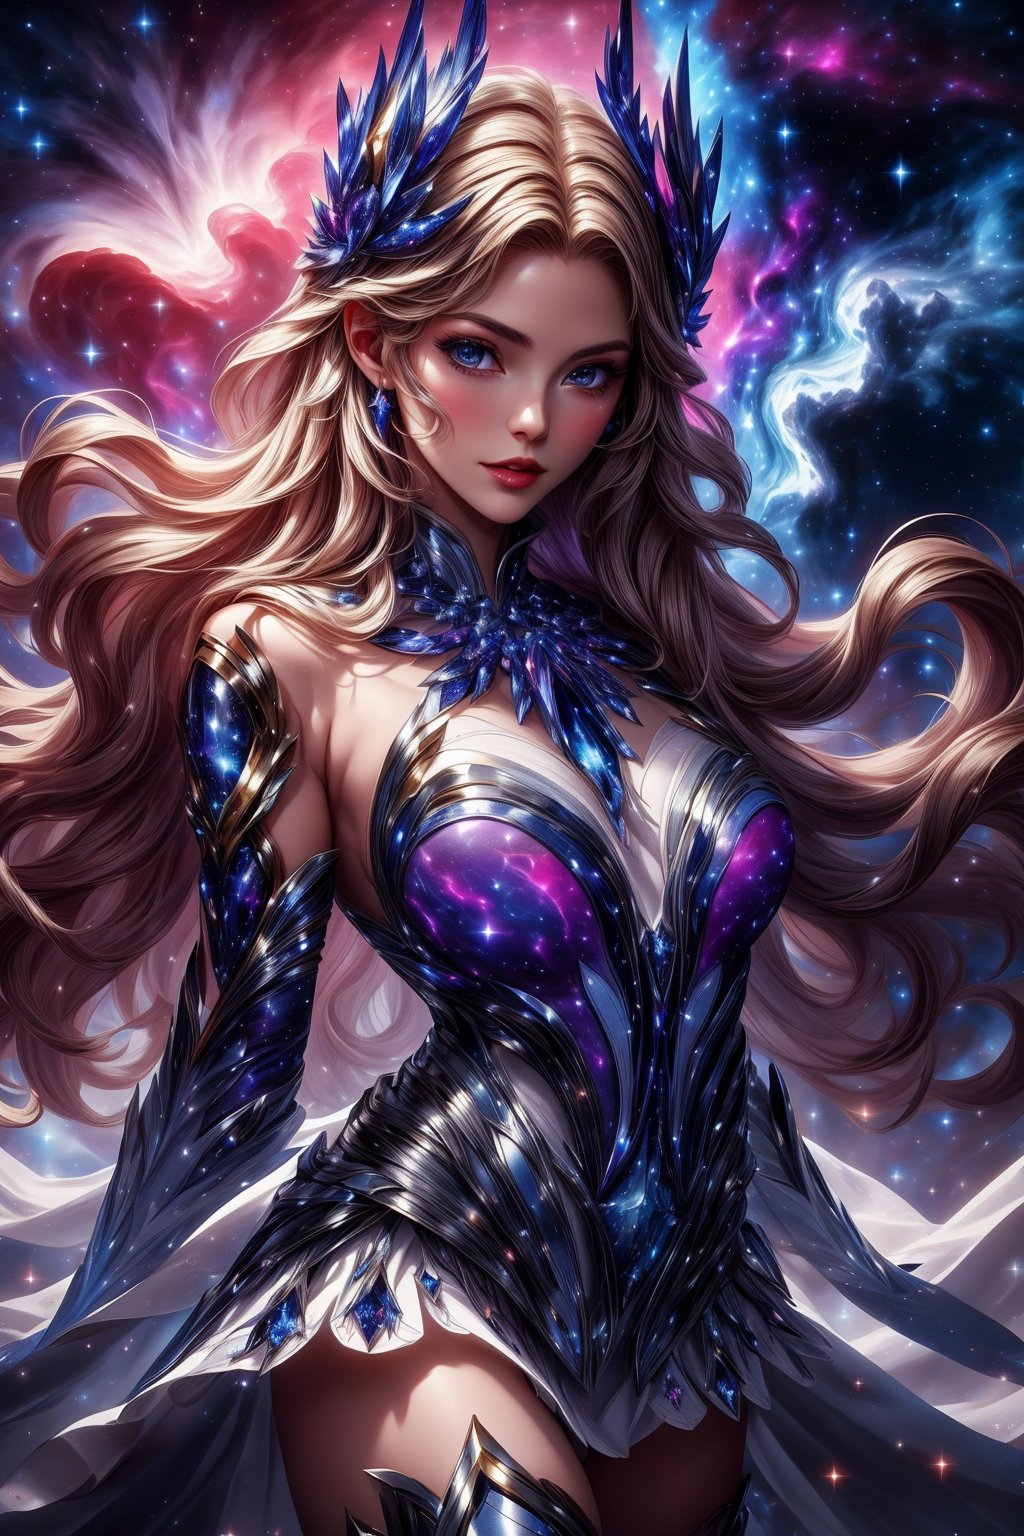 Odette with robes swirling with cosmic dust and nebulae in vibrant shades of purple, blue, and pink. Her hair should shimmer with cosmic energy and starlight. Her abilities should unleash cosmic storms and swirling galaxies. The surrounding should be a cosmic nebula with swirling gases, cosmic clouds, and distant stars, Odette_ML